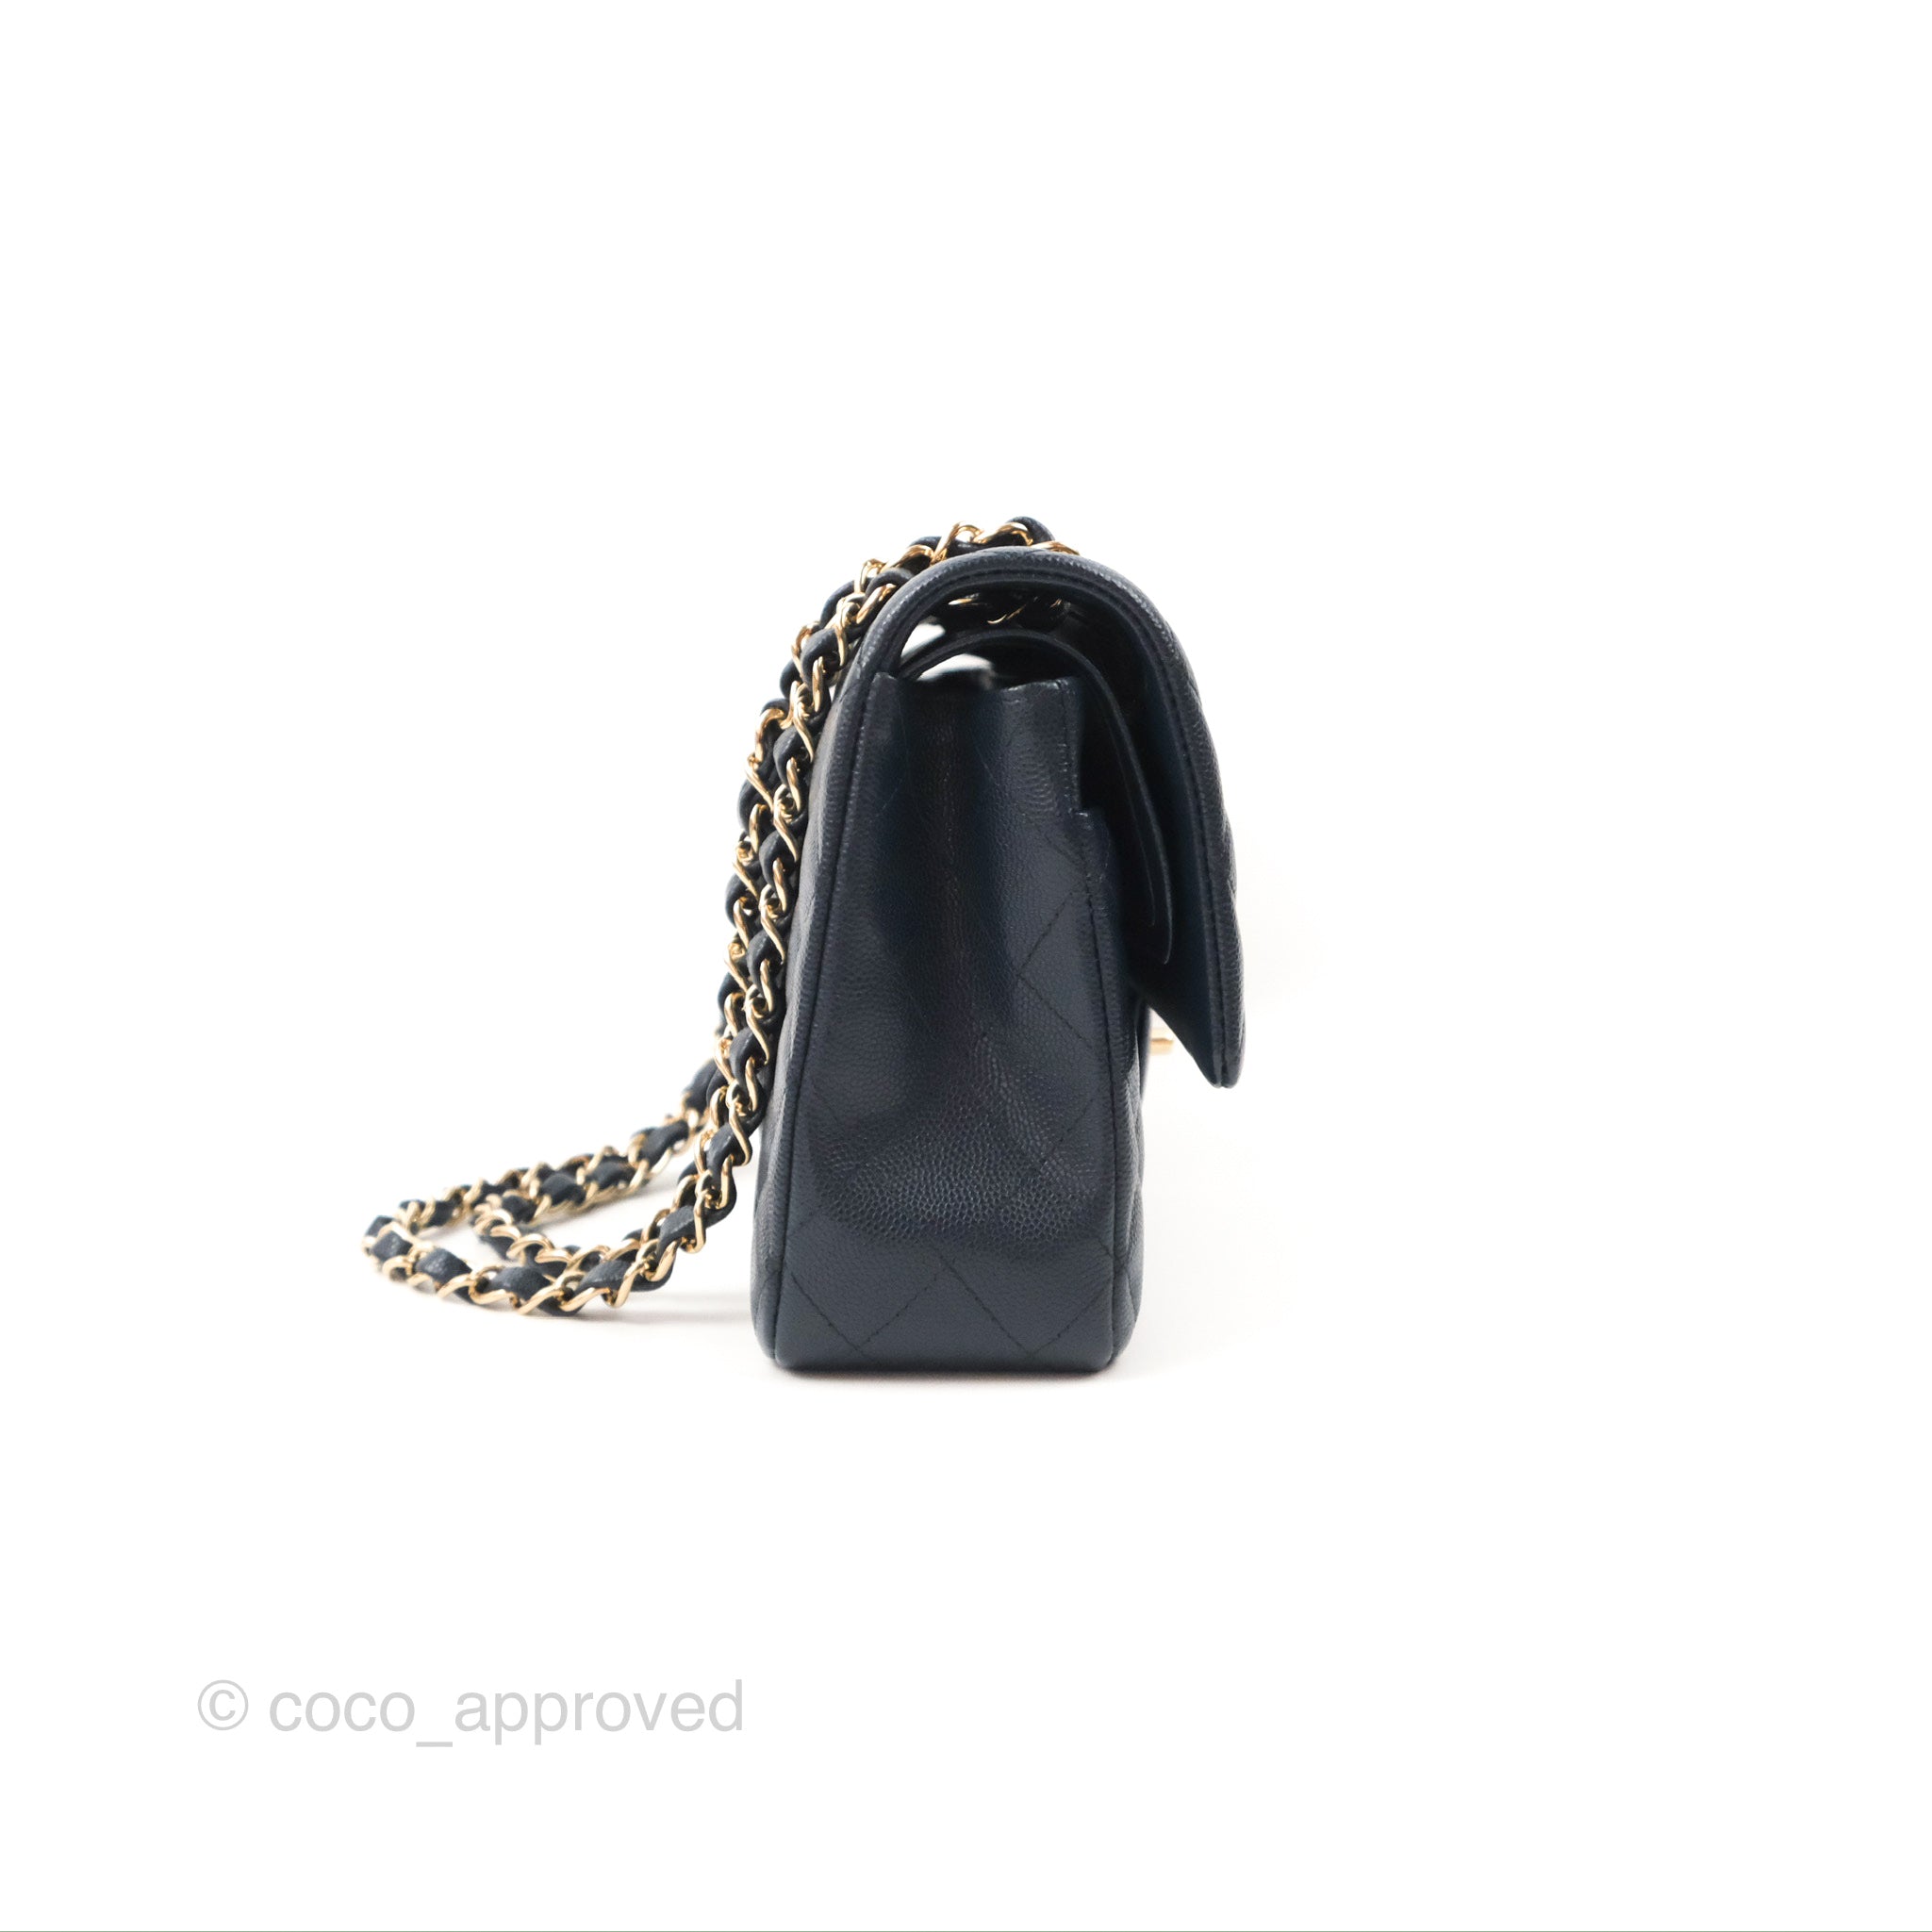 Sold at Auction: Chanel Marine Patent Leather Jumbo Classic Flap Bag